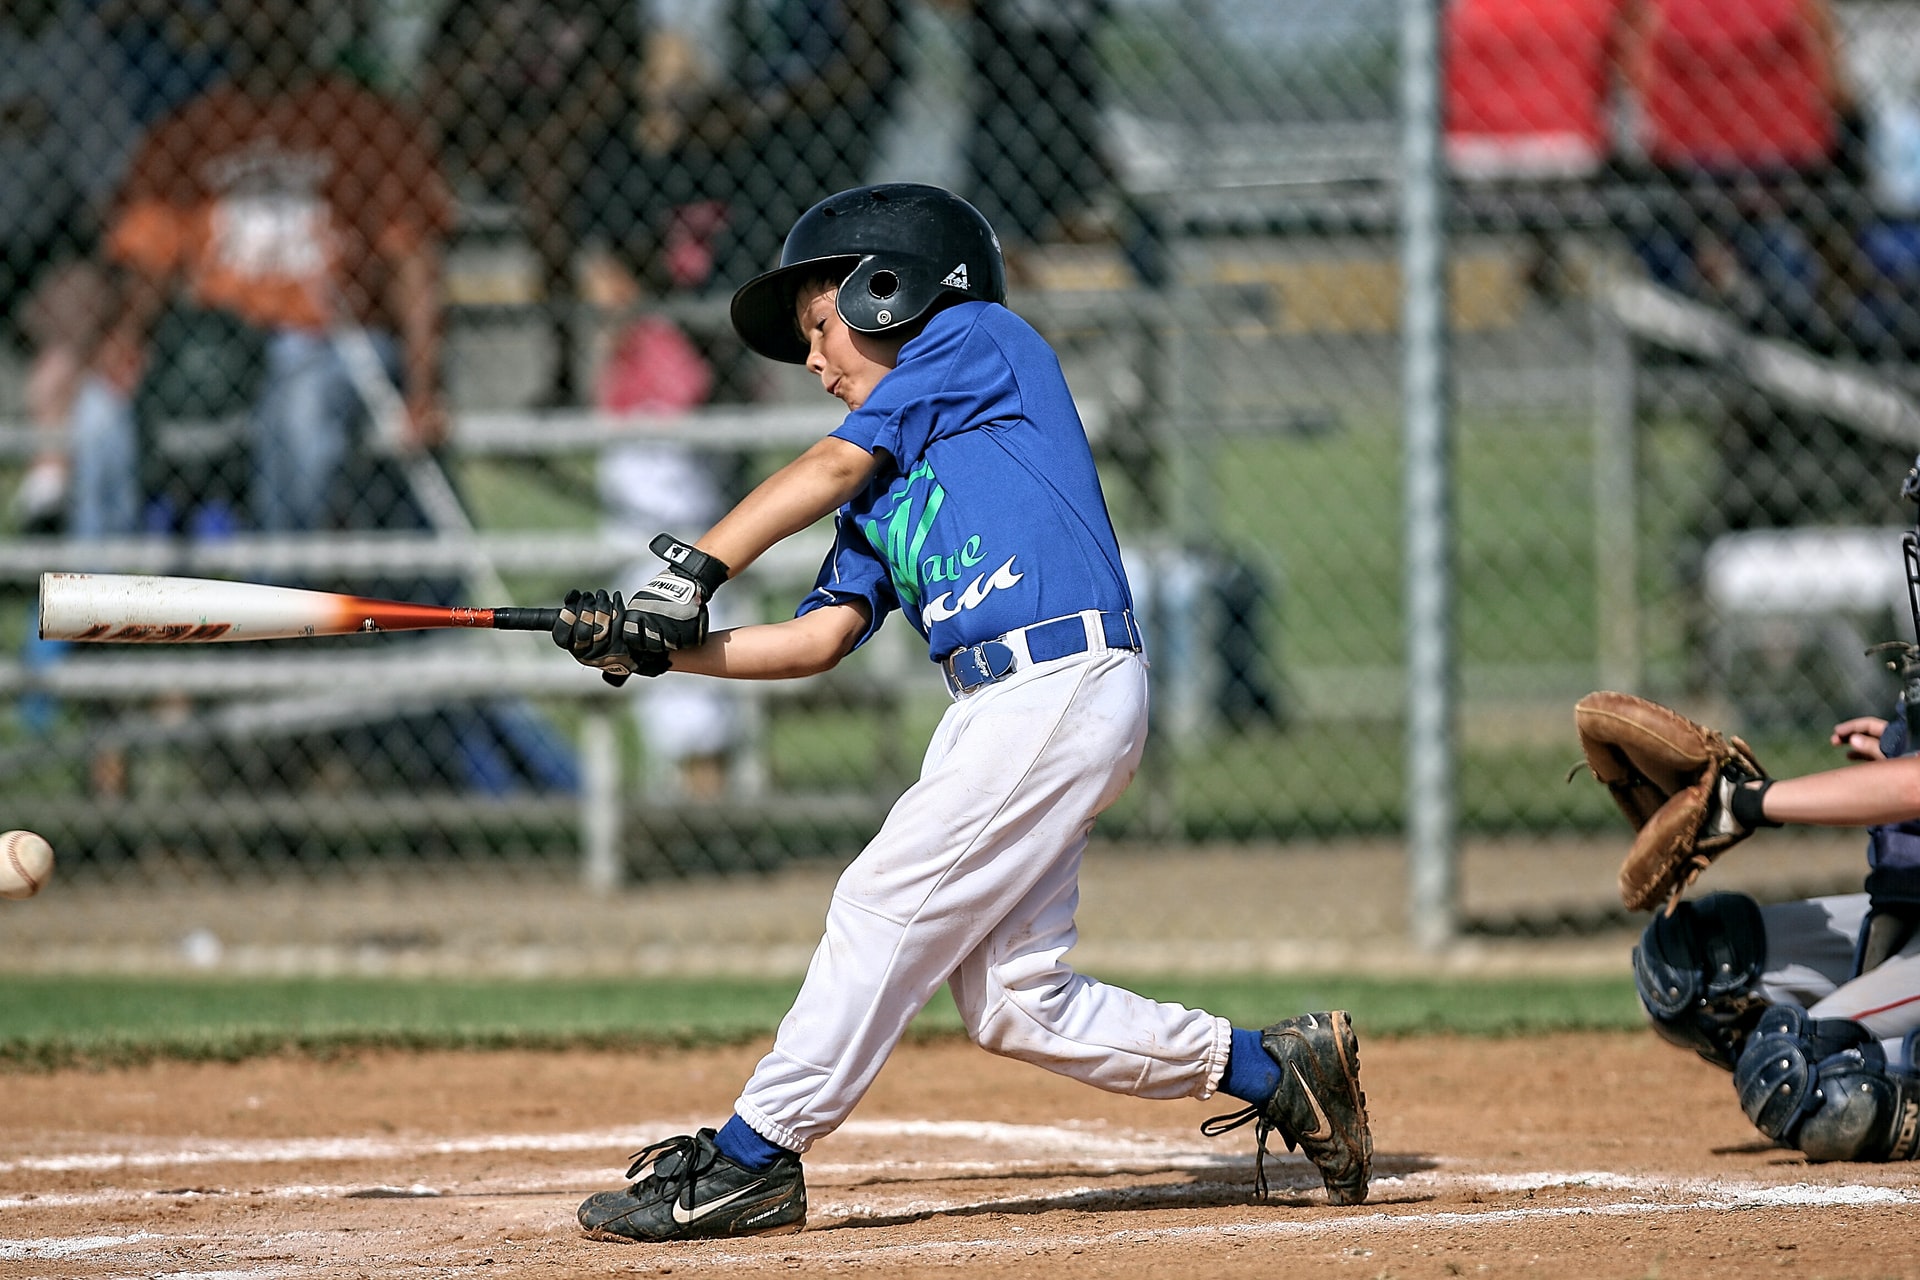 Little League baseball player connects with a pitch